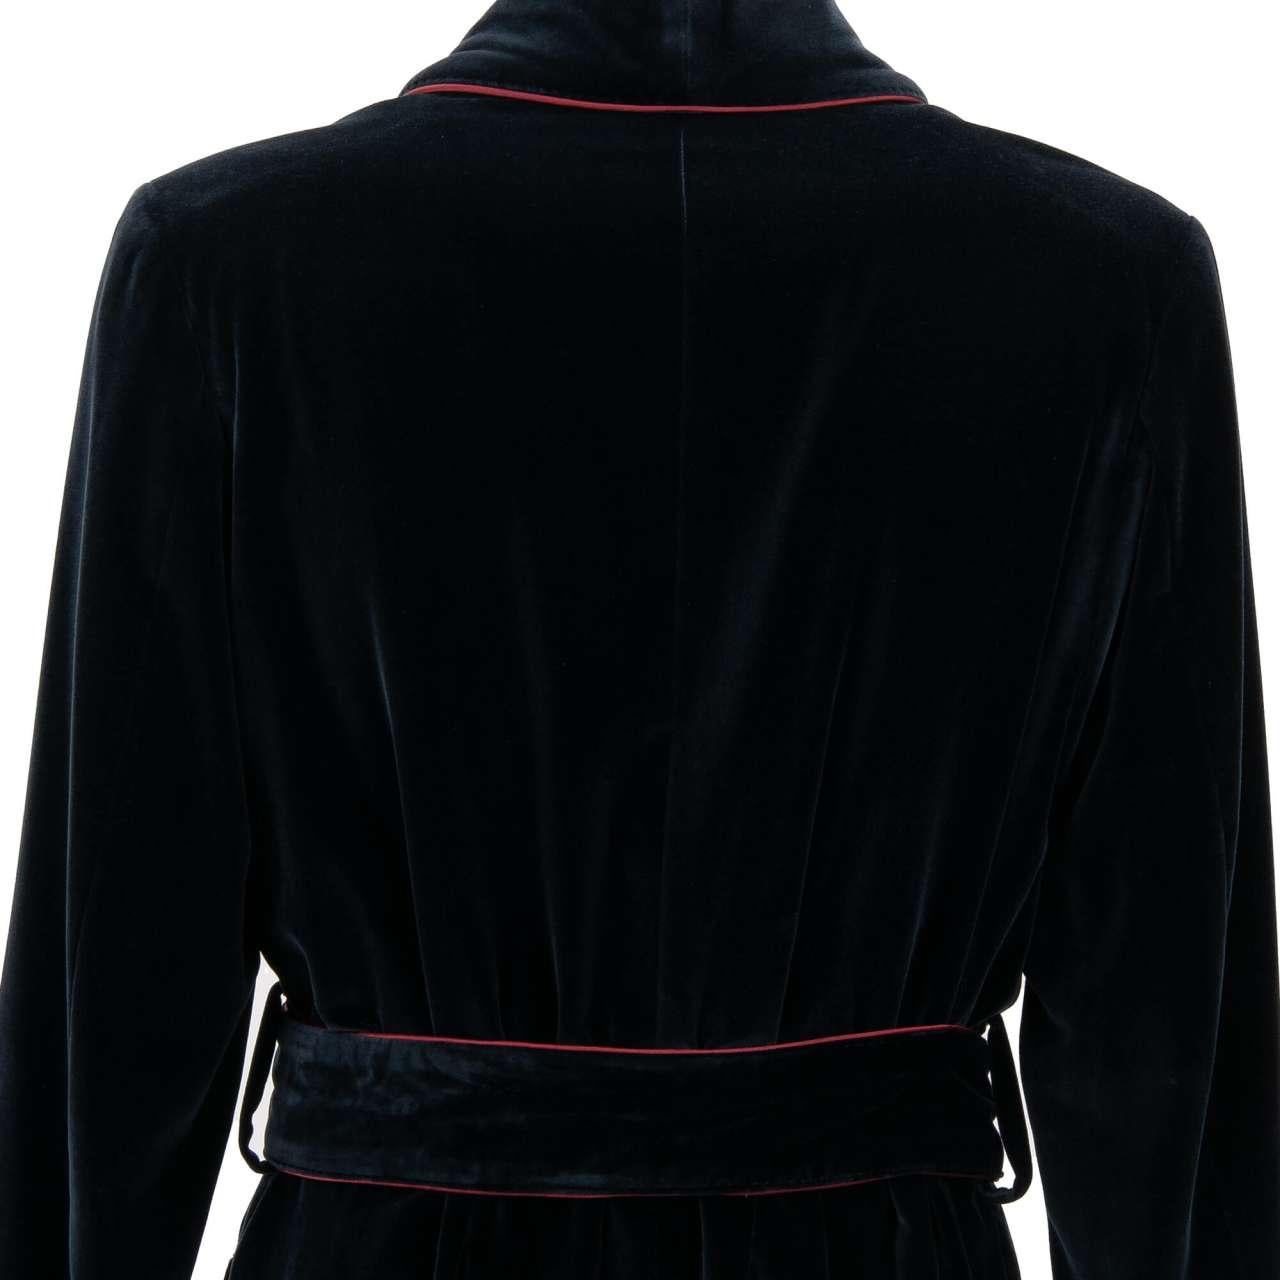 - Royal Style Velvet Robe / Coat with bee and crown embroidery, red contrast stripes and belt fastening by DOLCE & GABBANA - Former RRP: EUR 3,750 - MADE IN ITALY - New with Tag - Regular Fit - Model: G001KZ-FUVJJ-B0665 - Material: 74% Cotton, 26%